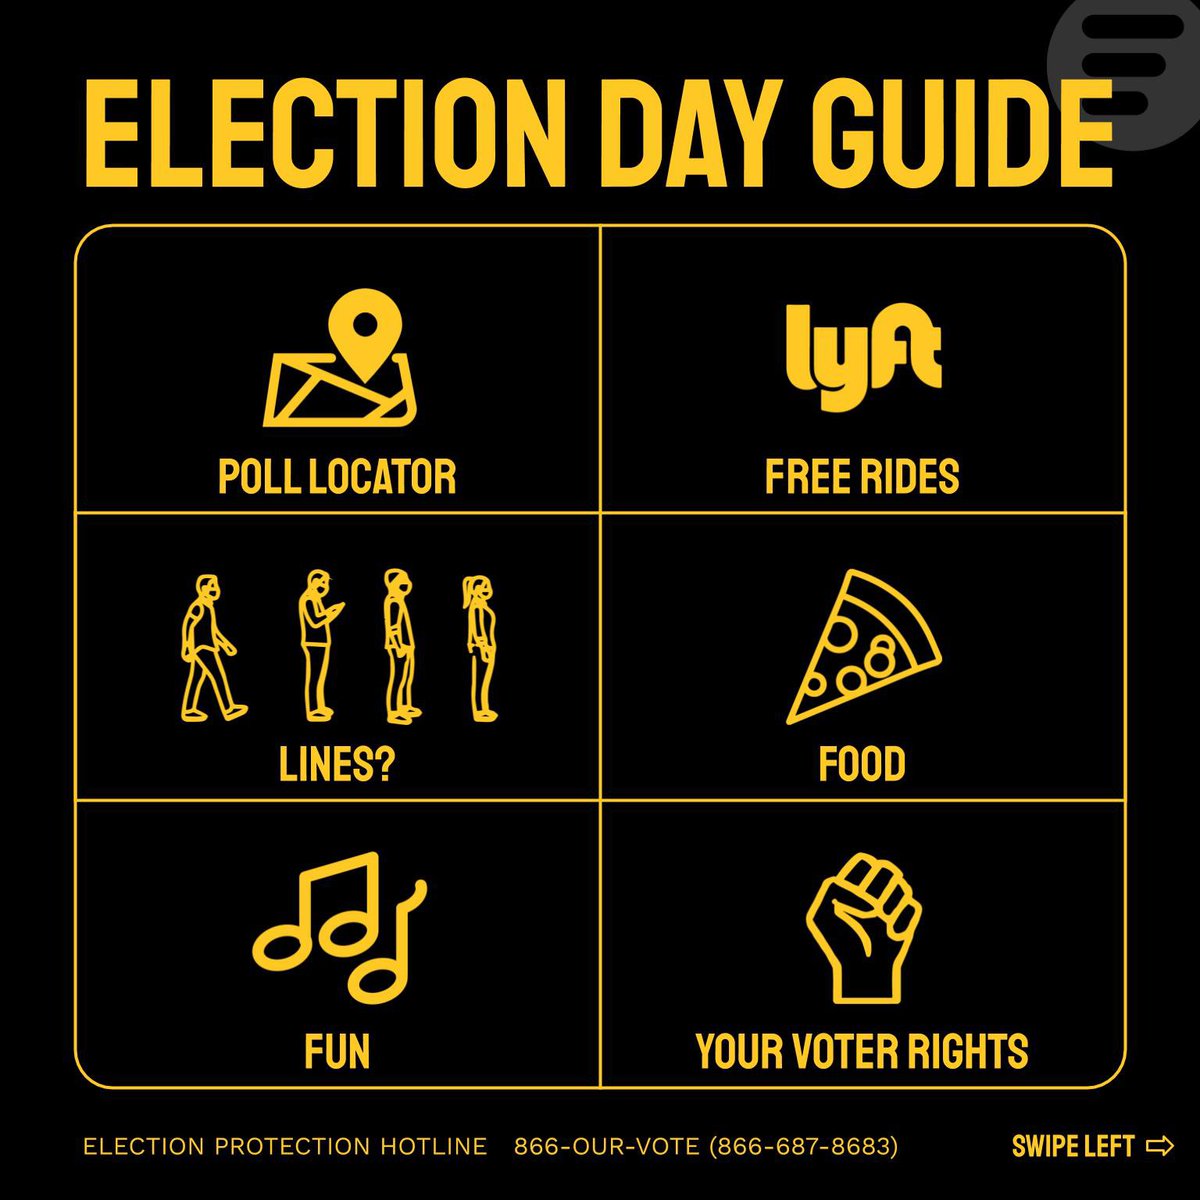 Heading to the polls???
Here are some tips! #EveryVoteCounts #ElectionDayGuide
#vote 